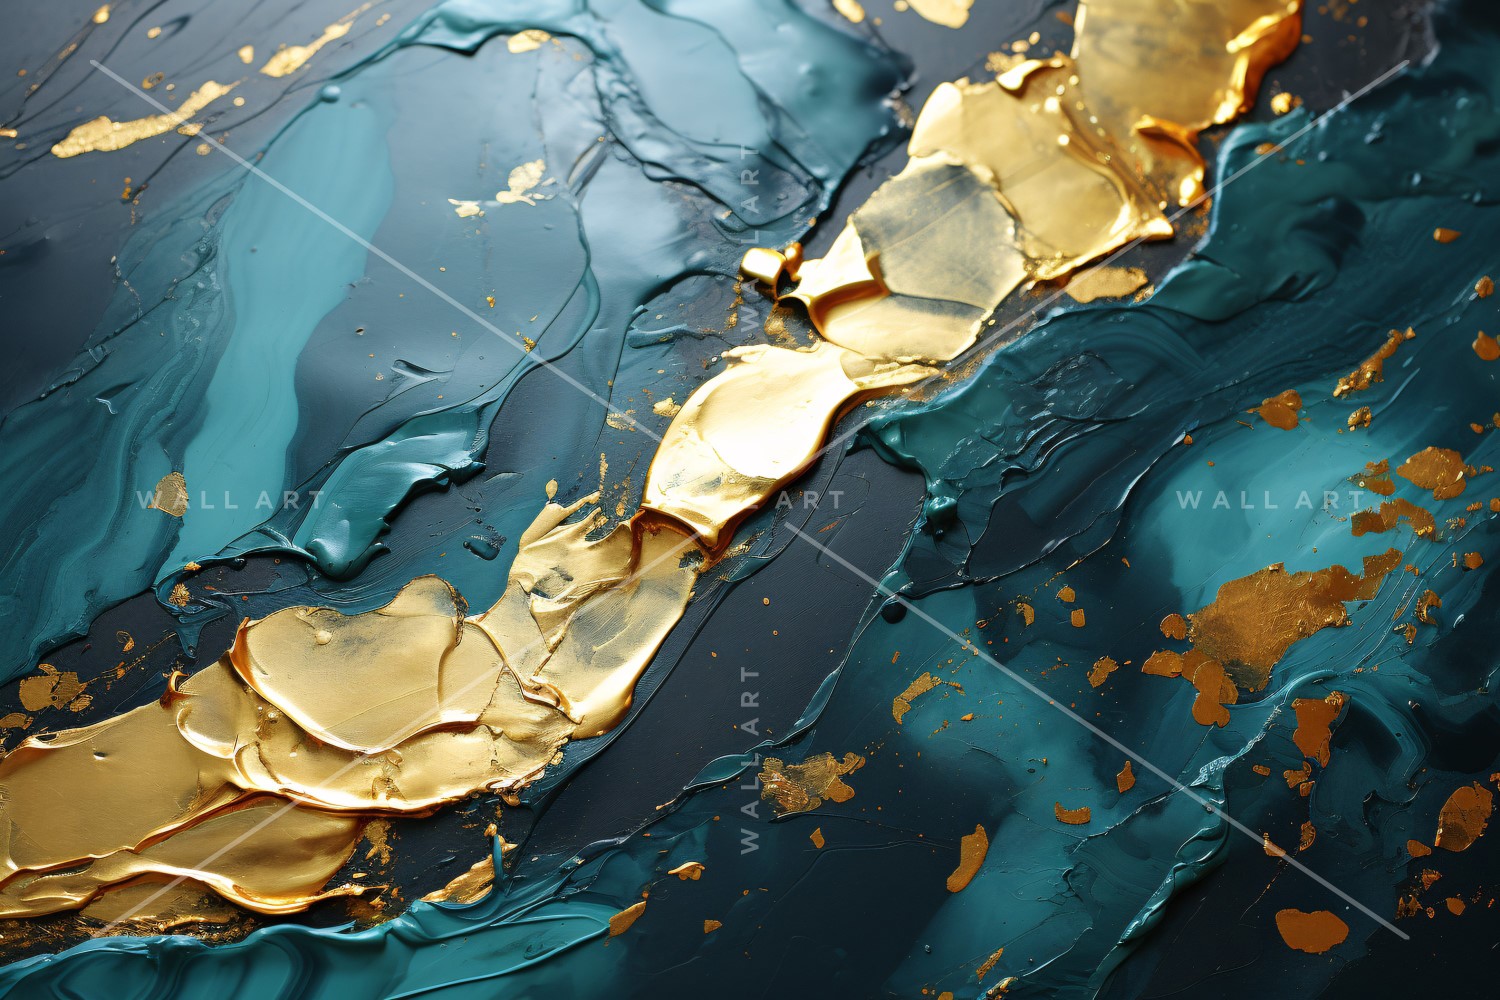 Golden Foil Art Abstract Expressions 66